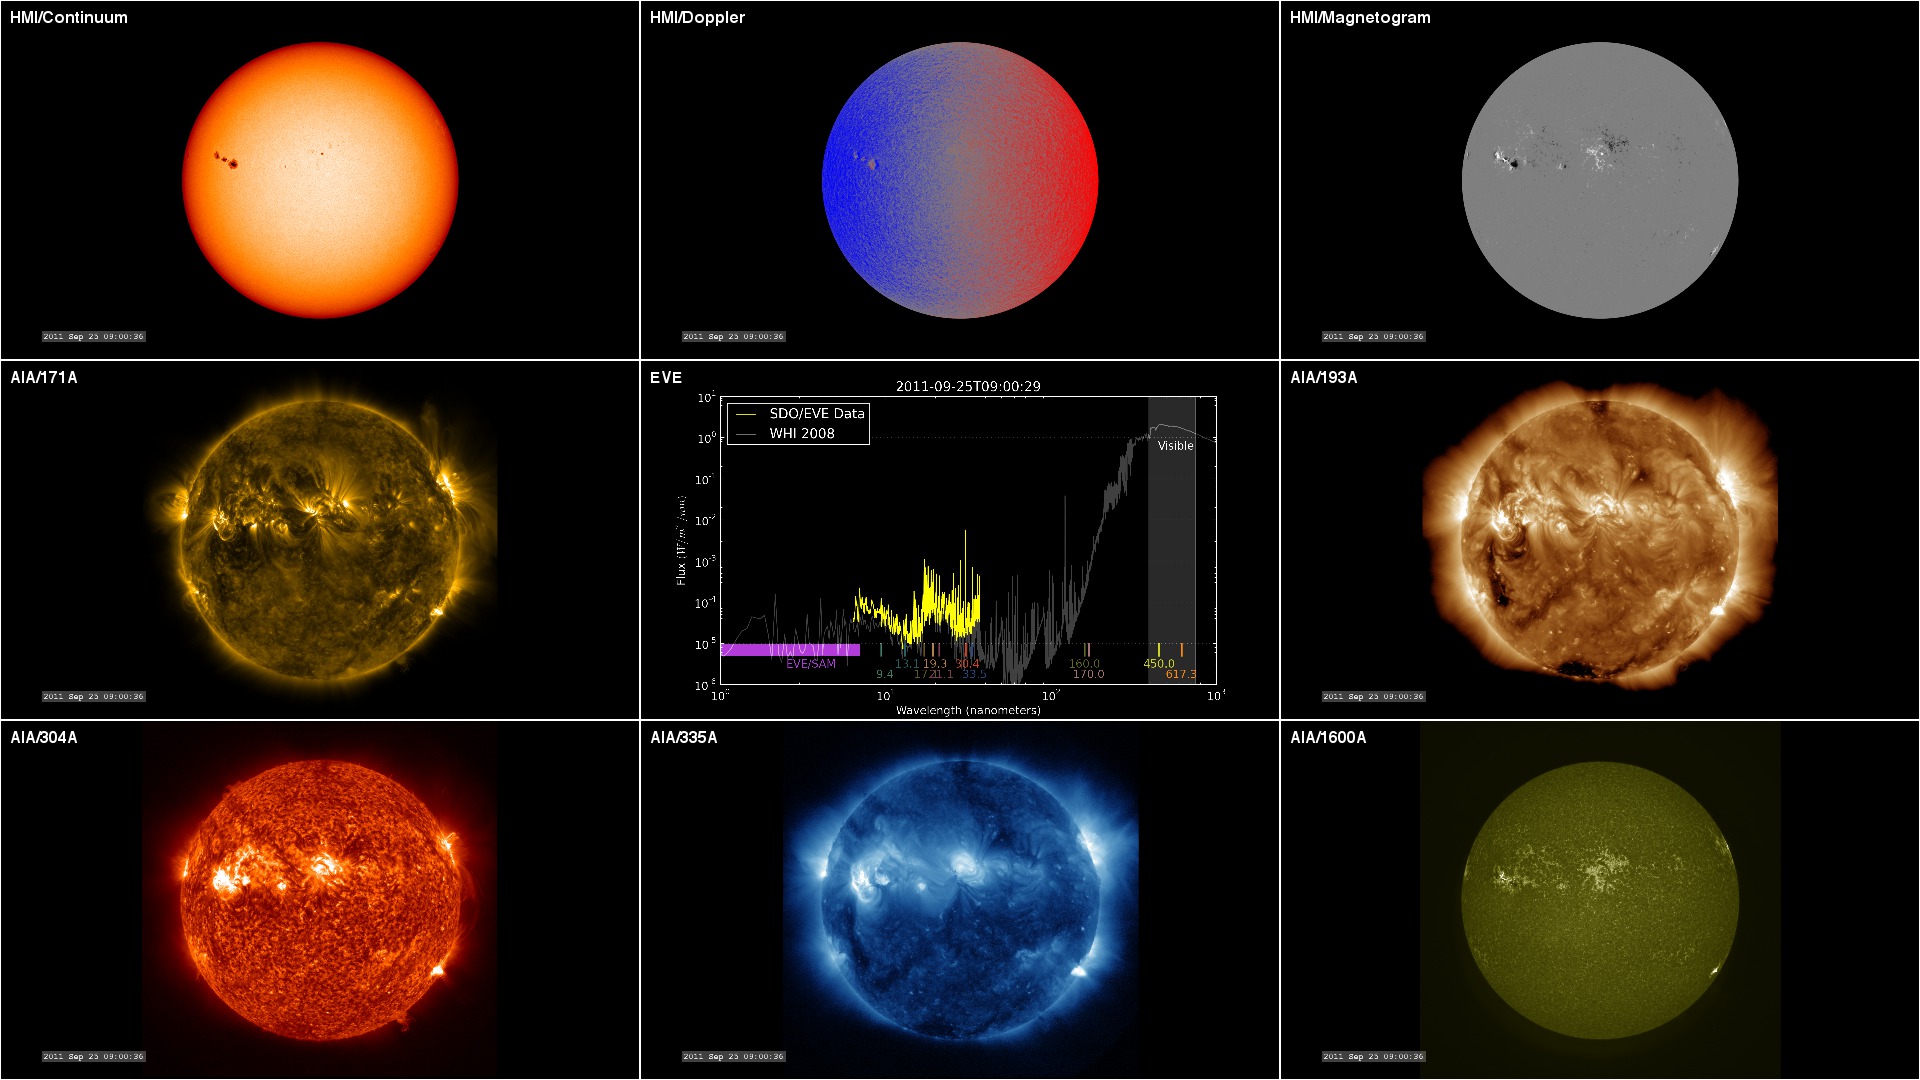 3x3 Layout view. This version is a subset of SDO filters. HMI imagery occupies the top row. EVE data is in the center. Selected AIA wavelengths other spots.